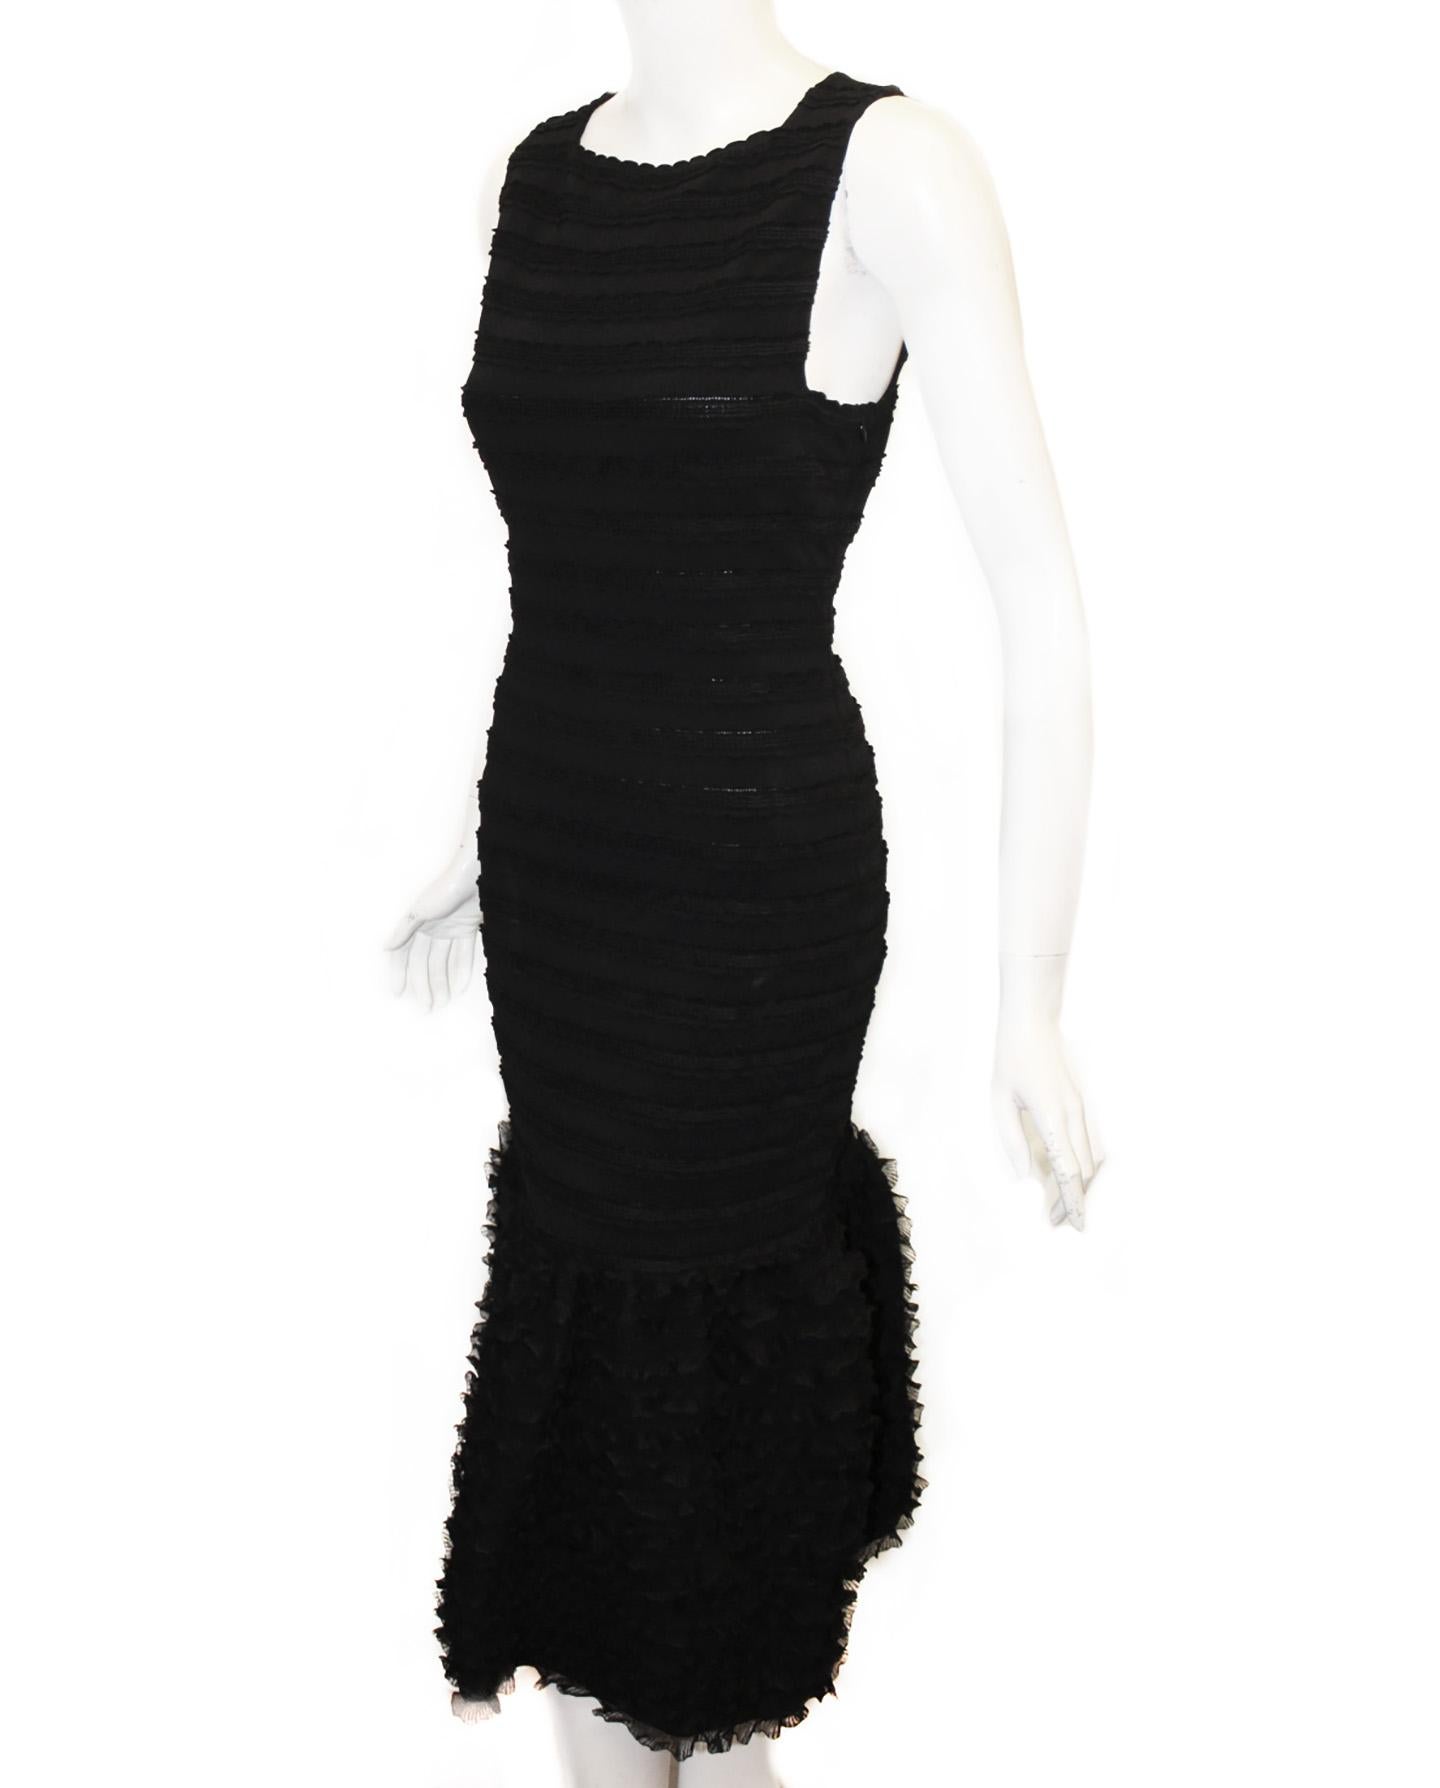 Alaia black sleeveless knit crochet dress incorporates a midi style with layered lace like ruffles creating a wide hem.   Alaia,  
a master sculptor with an unrivaled knowledge of fit and fabric,  molds his clothes perfectly to the female form. 